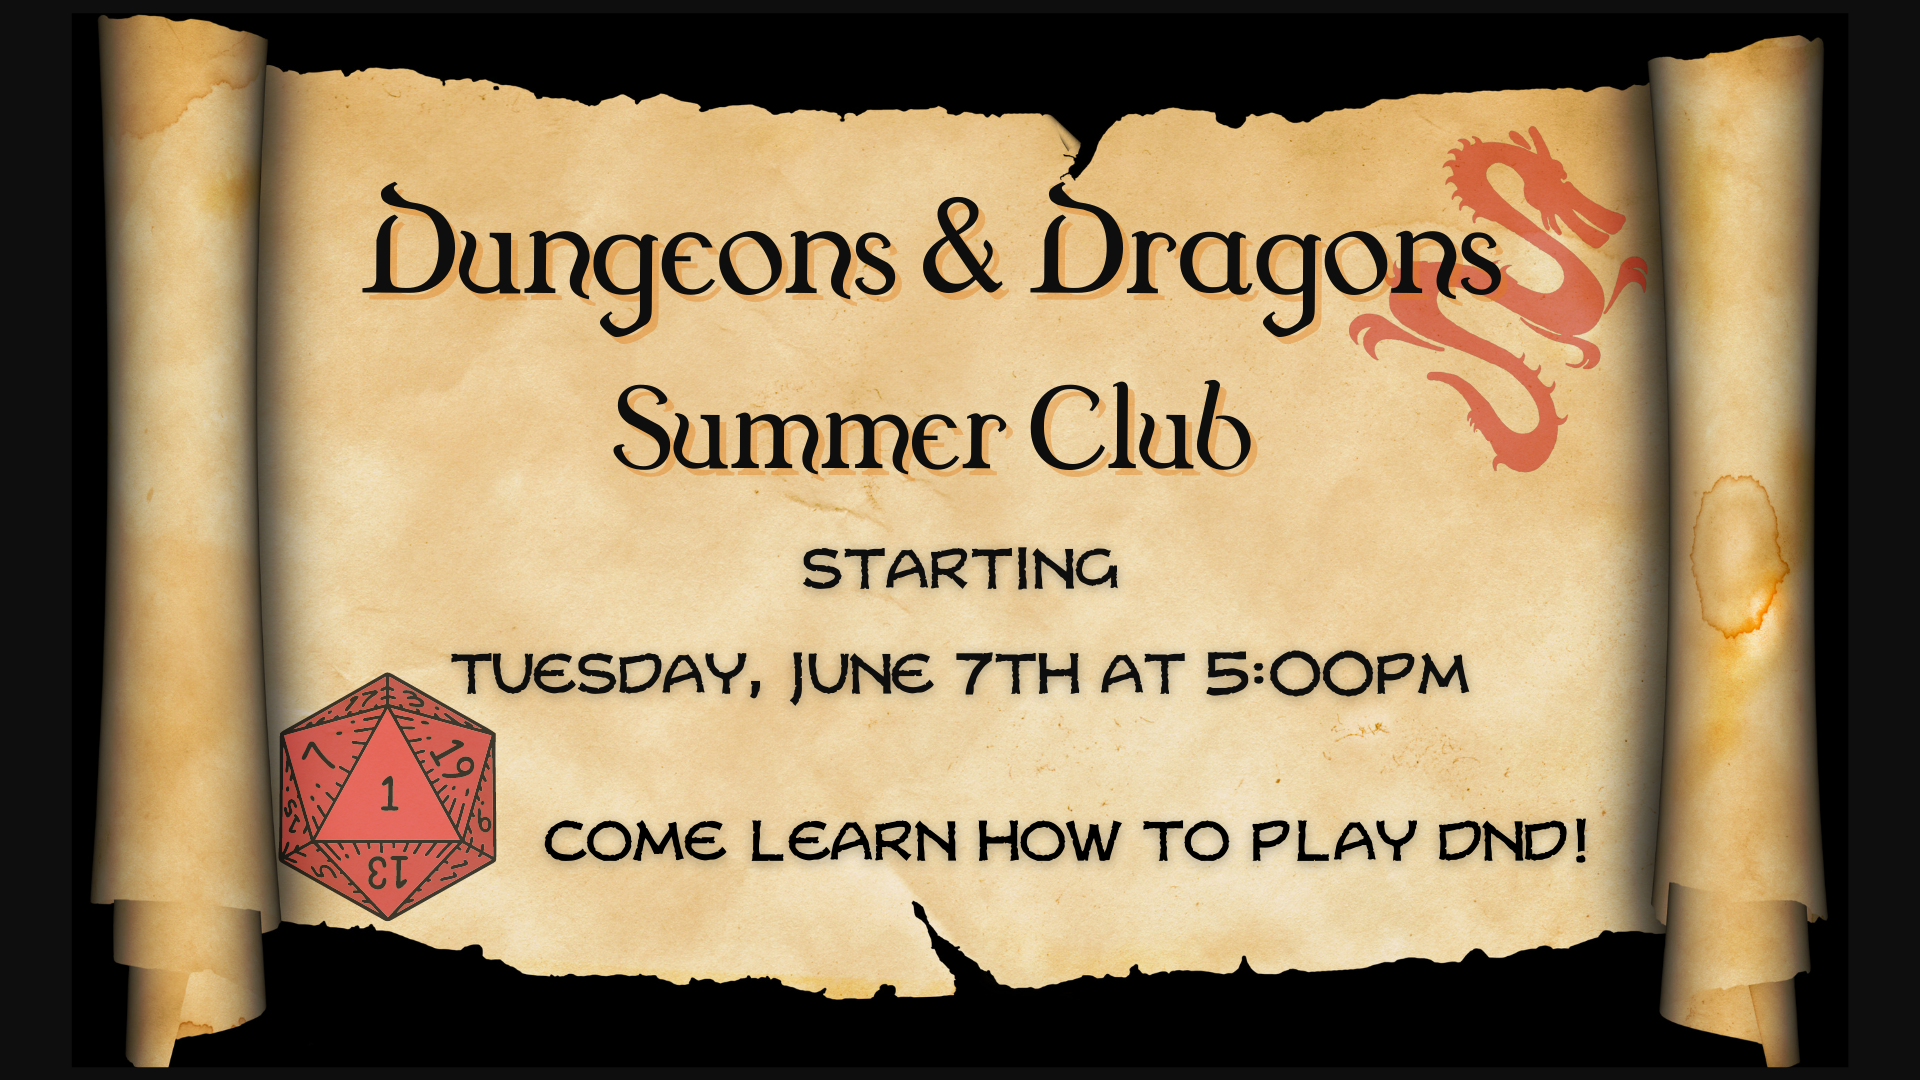 Dungeons and Dragons Summer Club, June 7th at 5:00pm